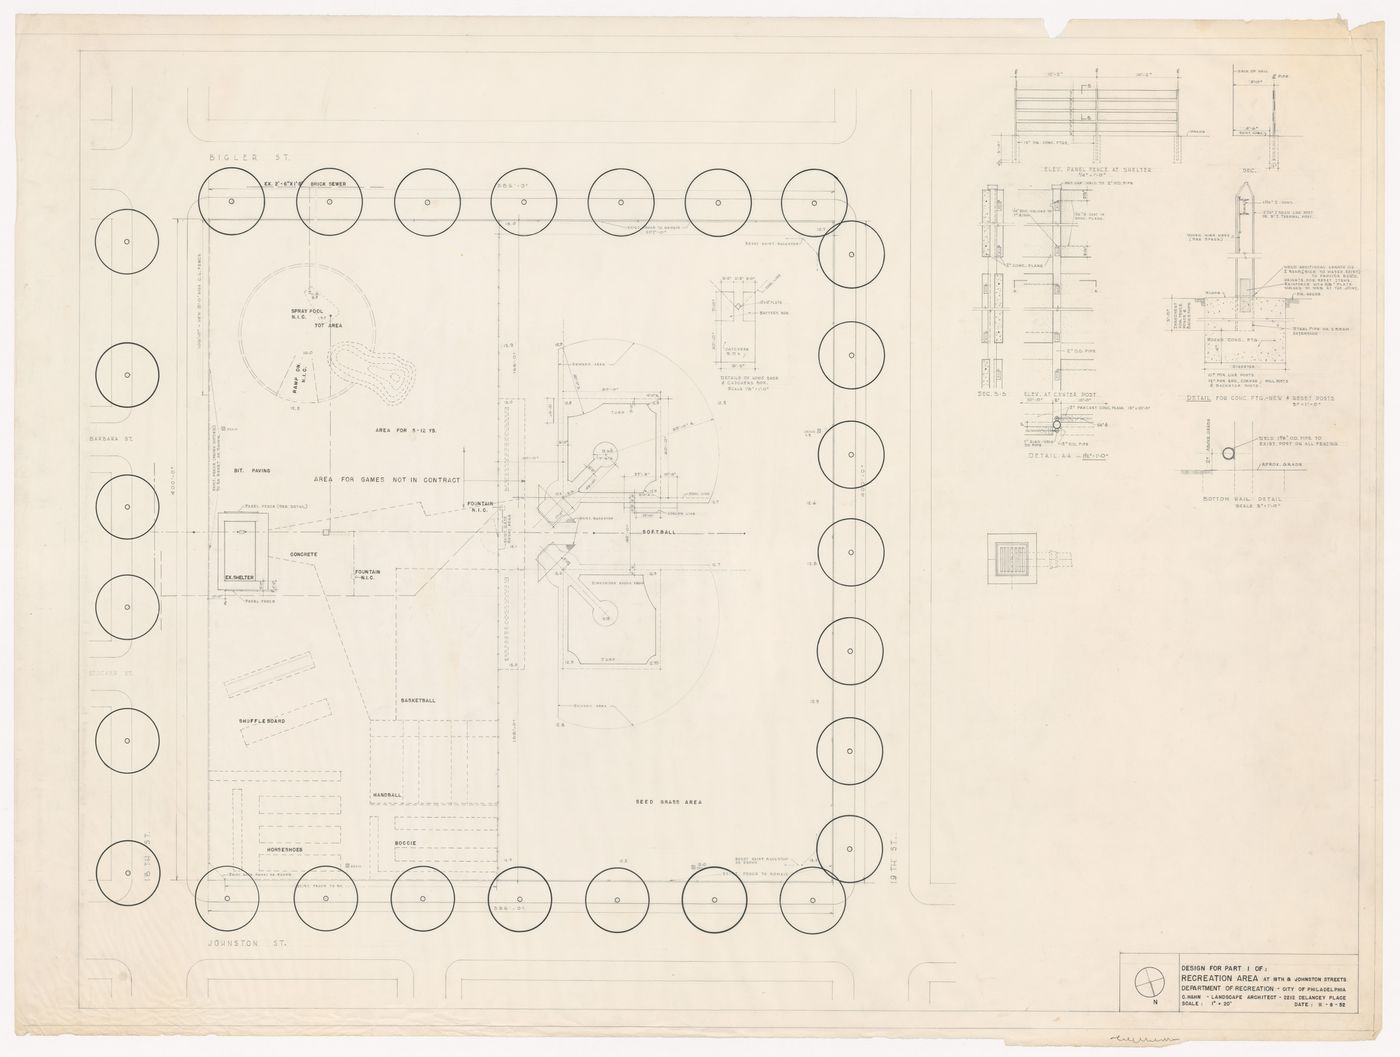 Site plan with details for recreational area at 18th and Bigler Streets, Philadelphia, Pennsylvania